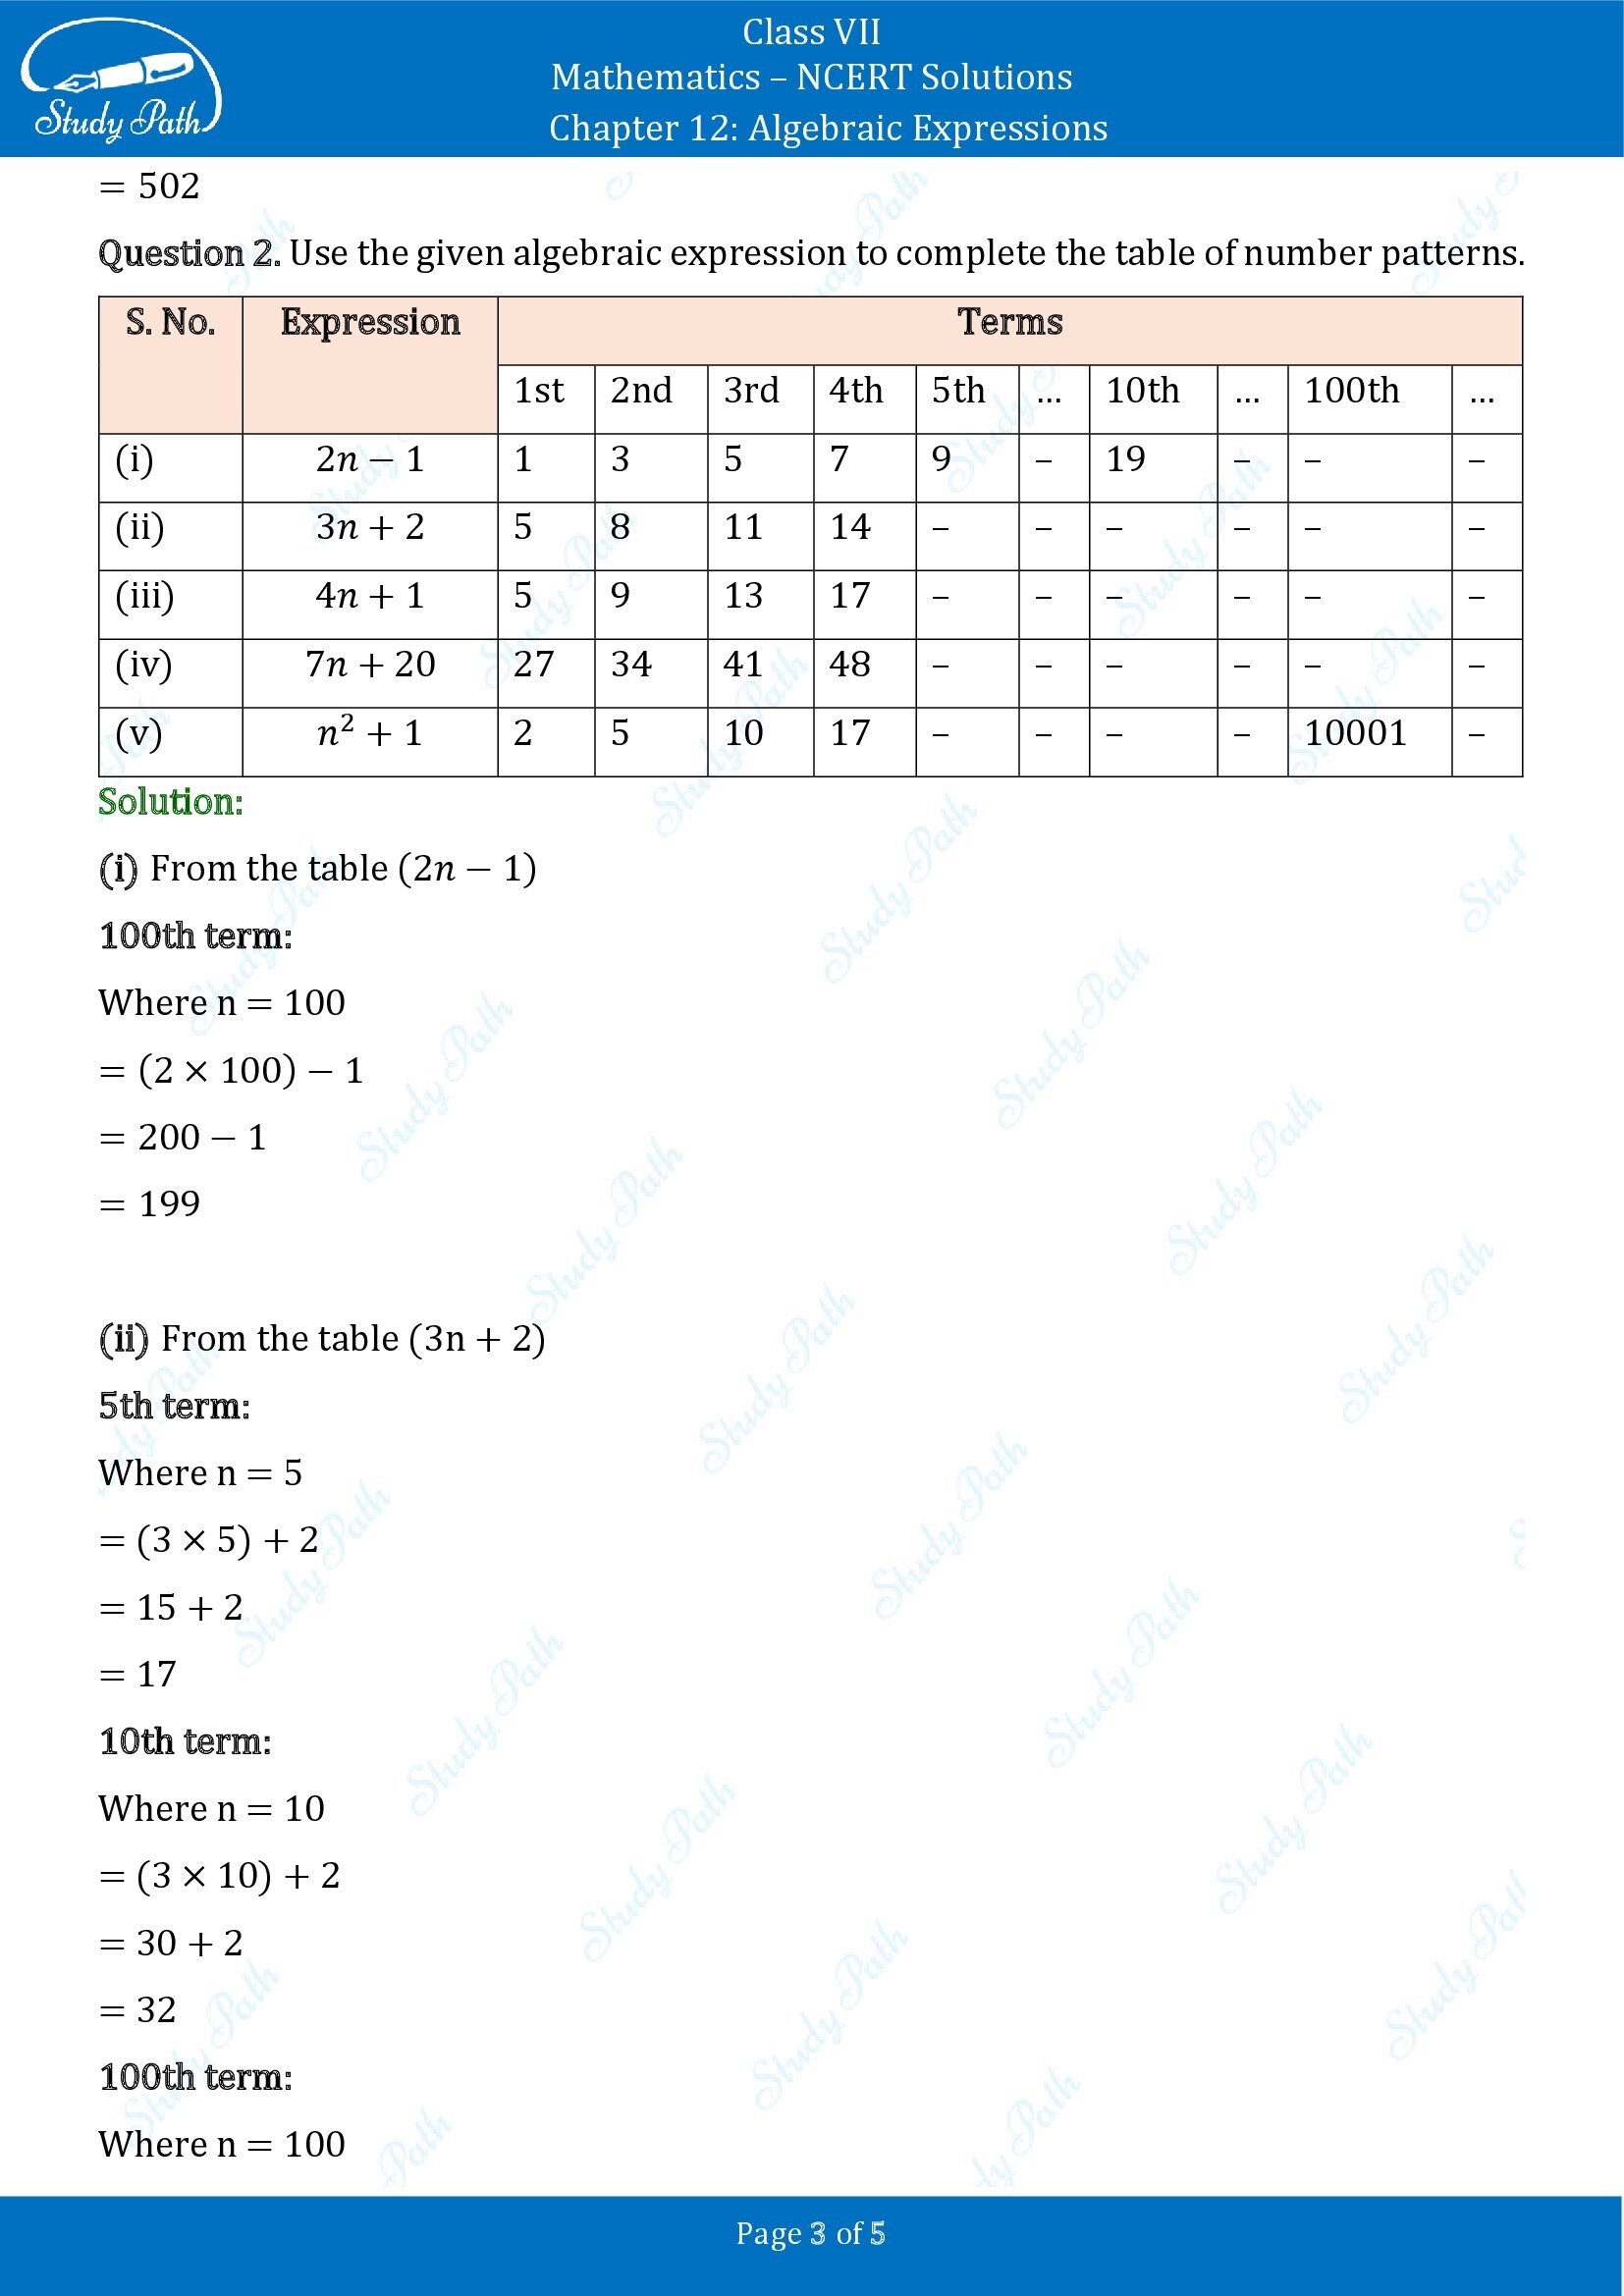 NCERT Solutions for Class 7 Maths Chapter 12 Algebraic Expressions Exercise 12.4 00003